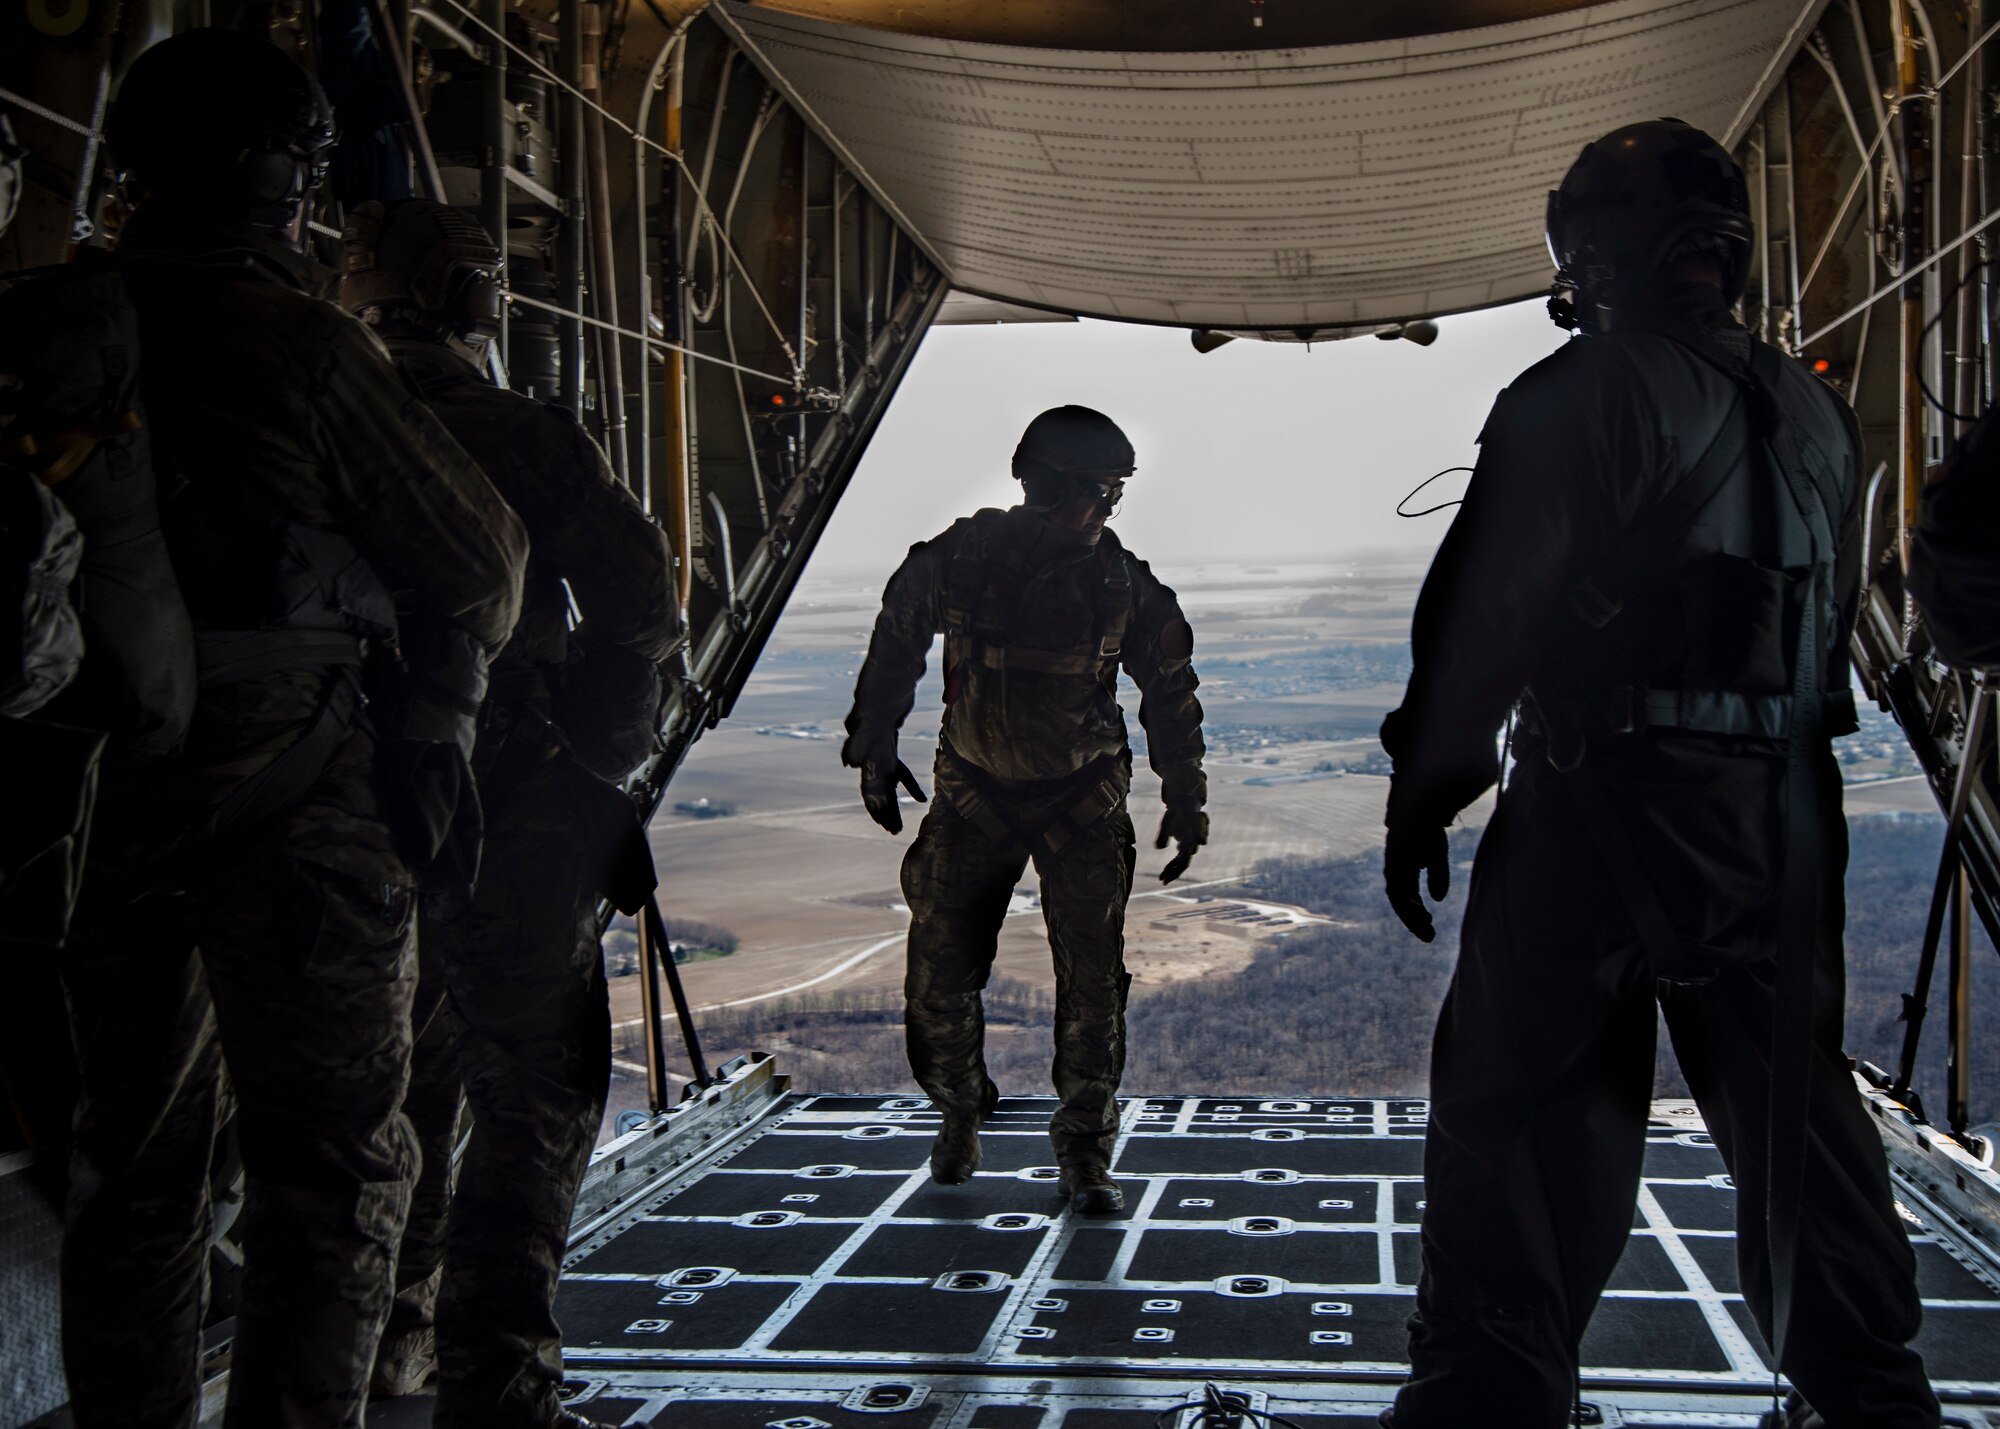 Master Sgt. Ed Dewejko, 19th Operational Support Squadron Survival, Evasion, Resistance and Escape superintendent, prepares for a static line jump from a Lockheed C-130 Hercules above the drop zone at Scott Air Force Base, Illinois March 2, 2017. The drop zone is a new addition to the airfield enhancing capabilities to conduct a diverse set of operations. (U.S.Air Force Photo by Airman 1st Class Daniel Garcia)